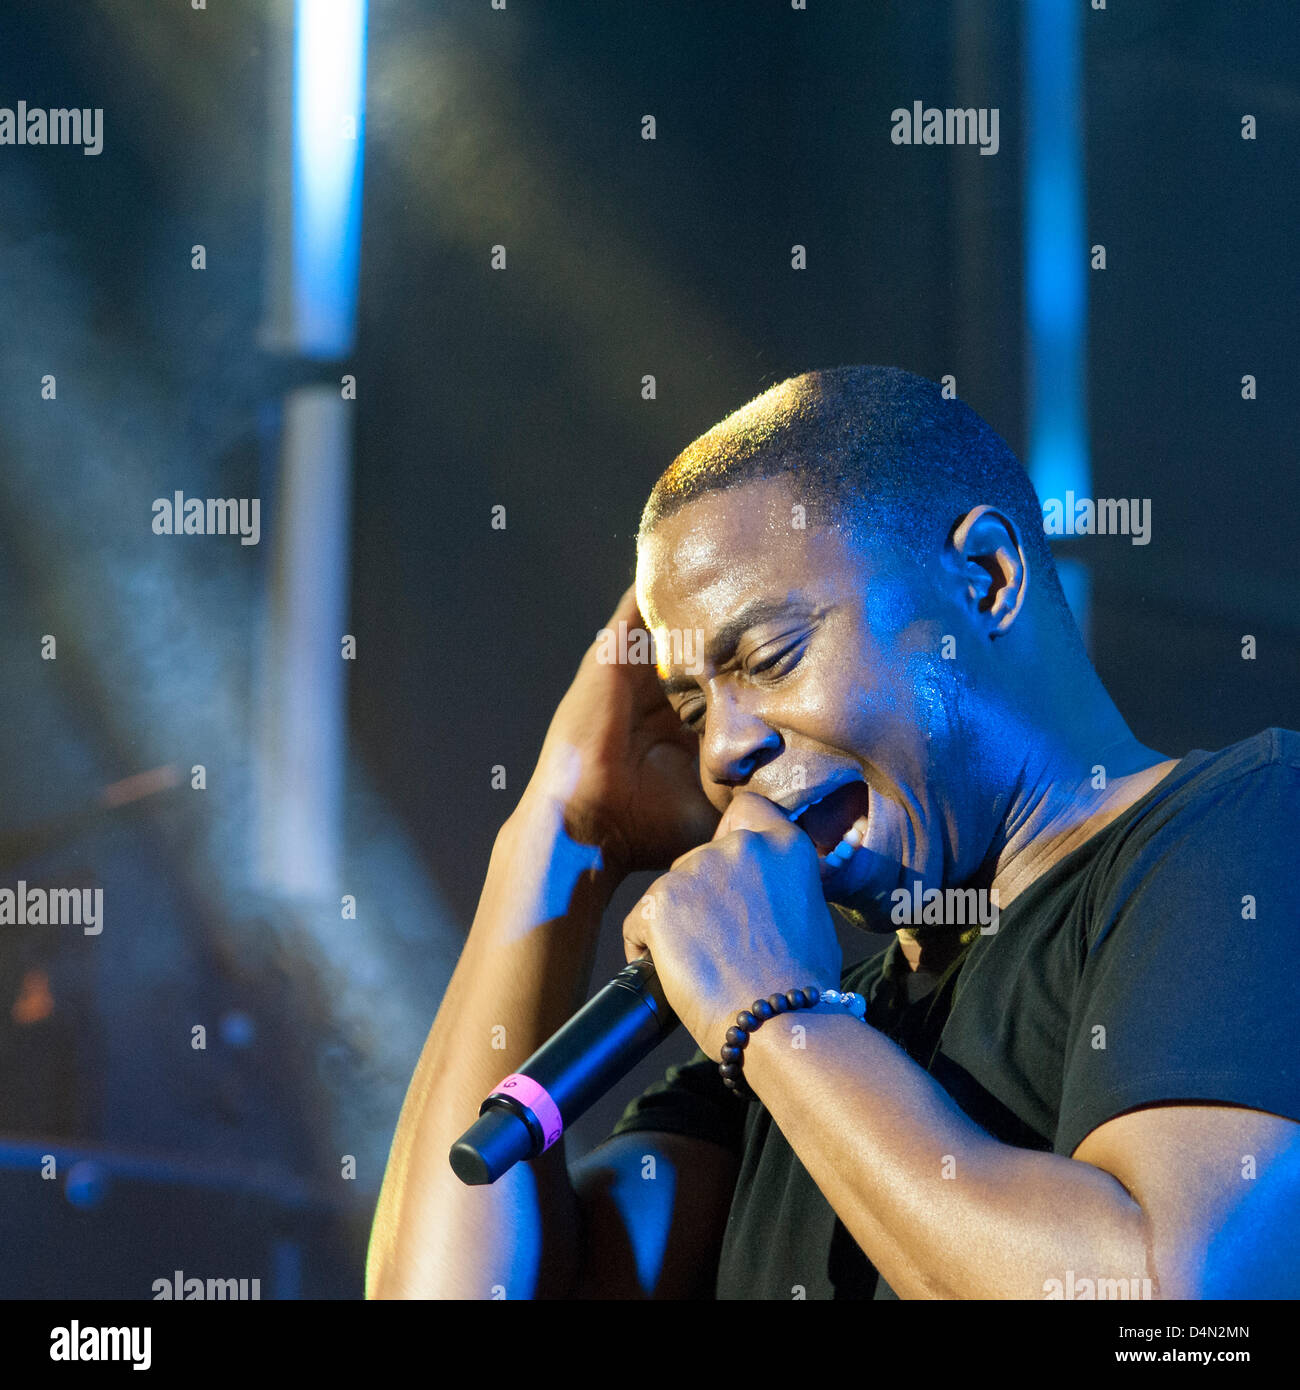 Doug E. Fresh, rapper and beatbox artist, performs during 2013 South by Southwest Music Festival in Austin, TX USA. March 14, 2013 Stock Photo